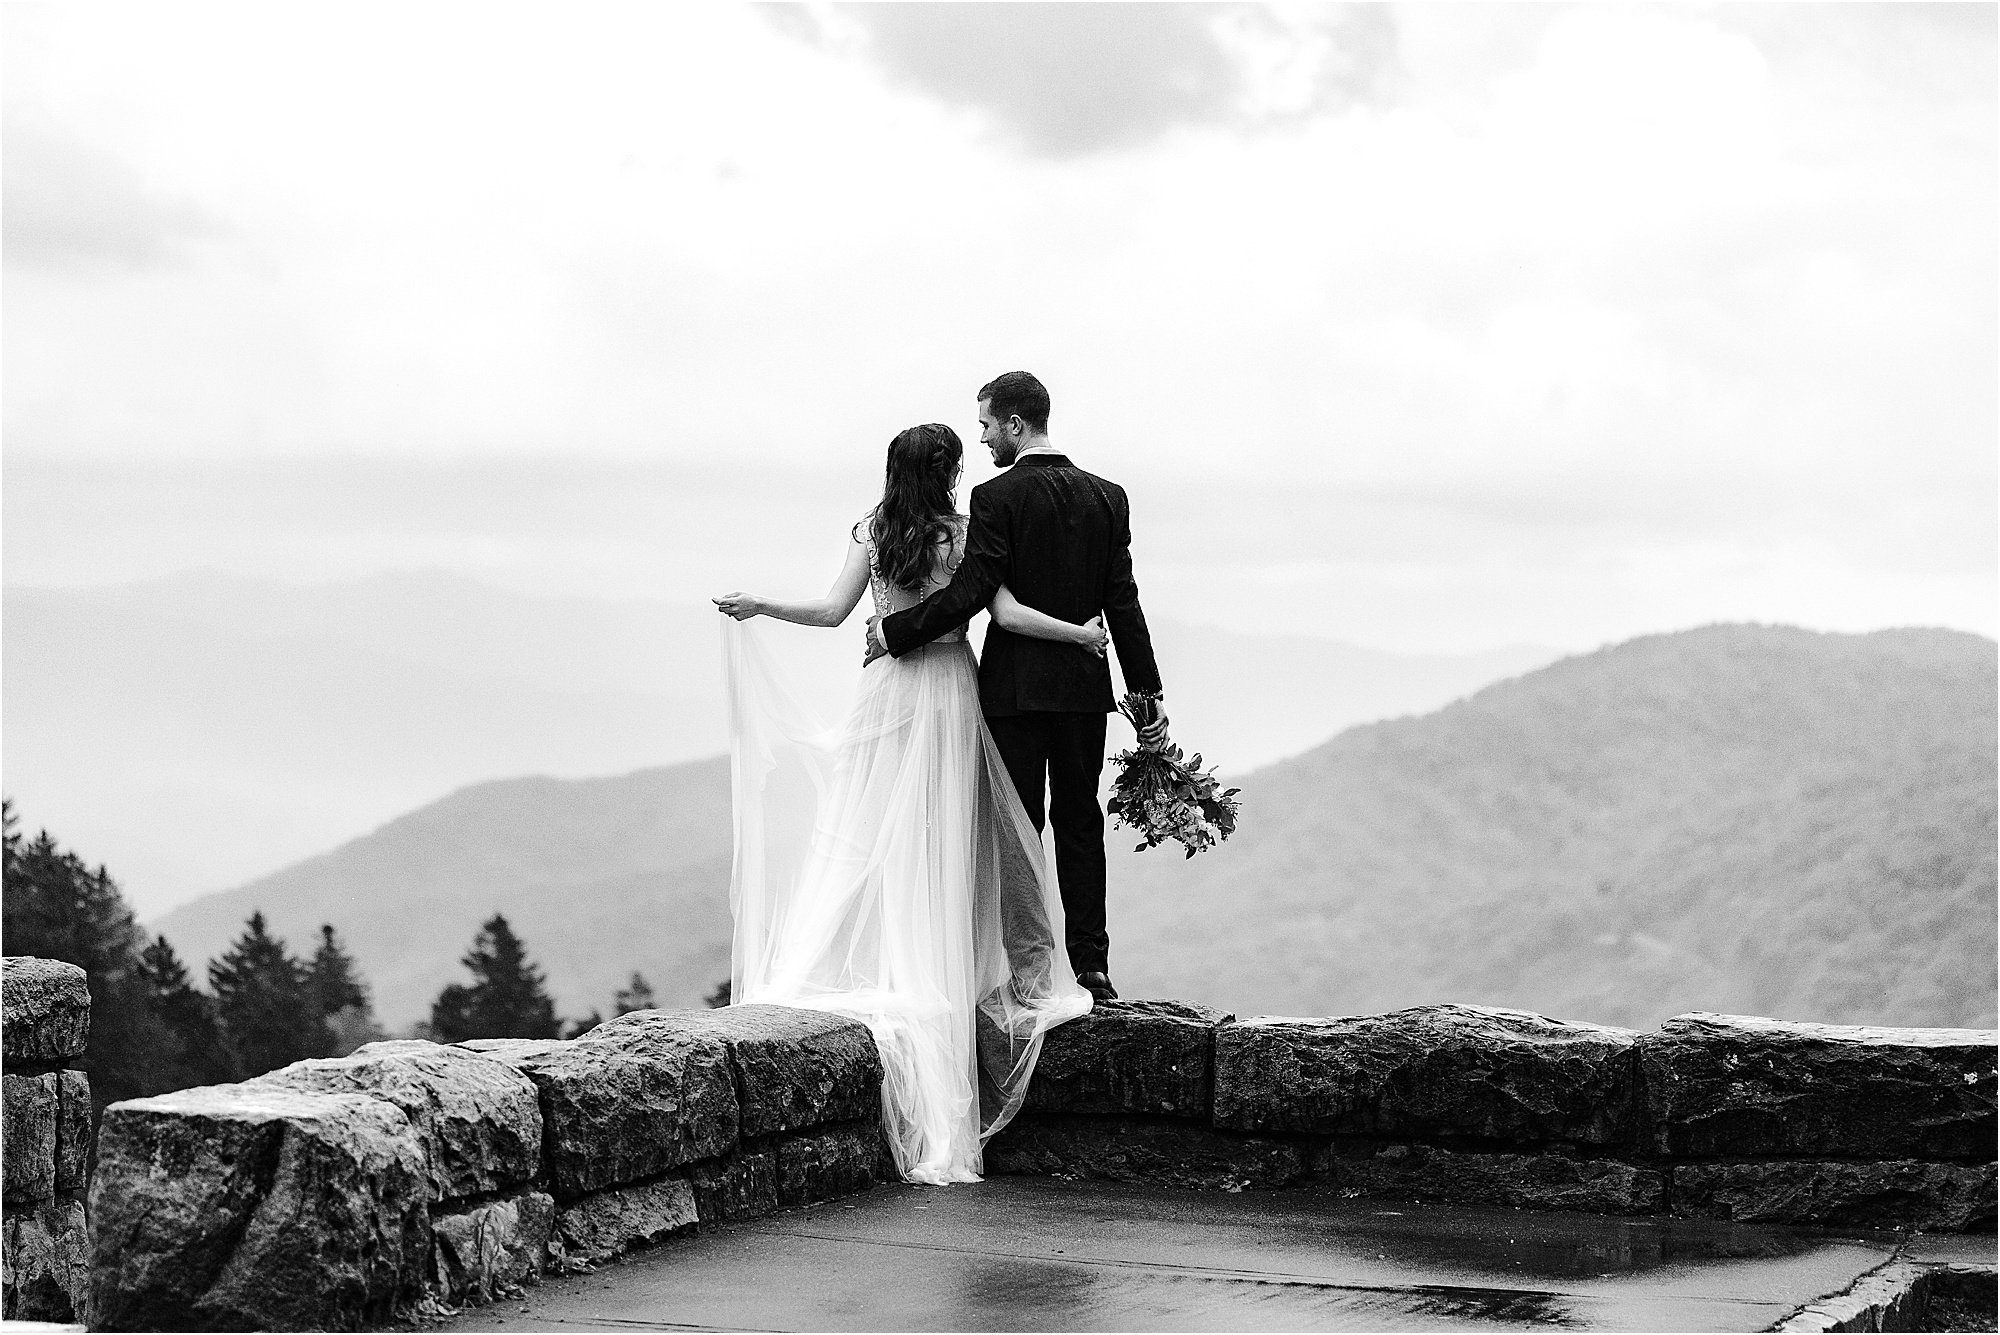 Intimate Newfound Gap Elopement in The Great Smoky Mountains | Erin Morrison Photography www.erinmorrisonphotography.com